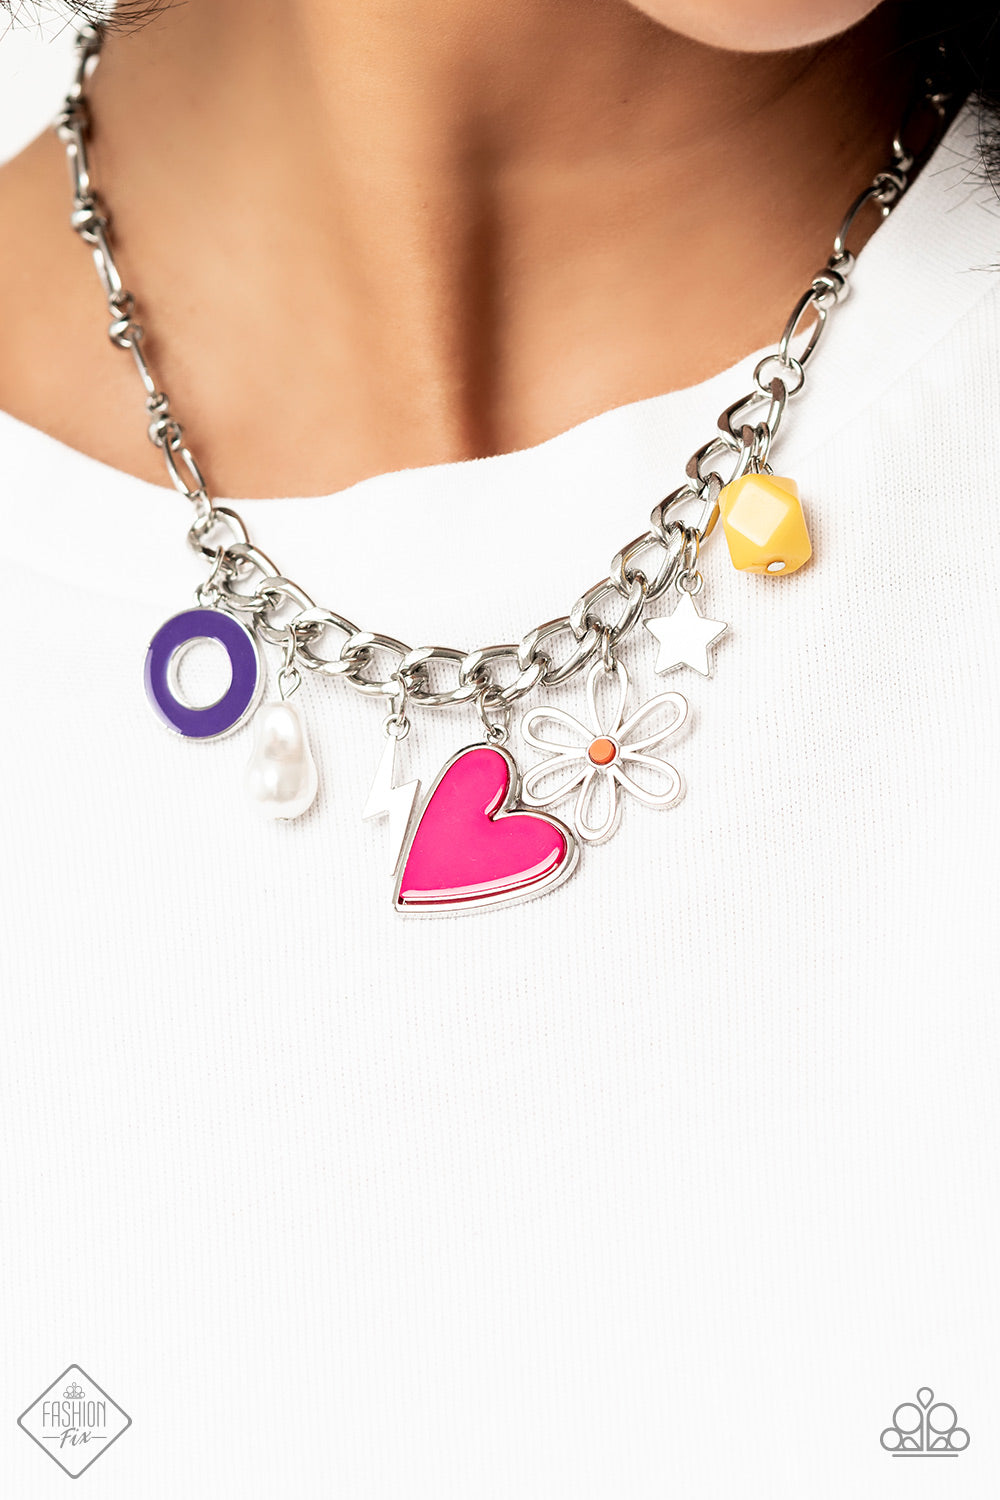 Living in CHARM-ony Necklace (Multi, Purple)